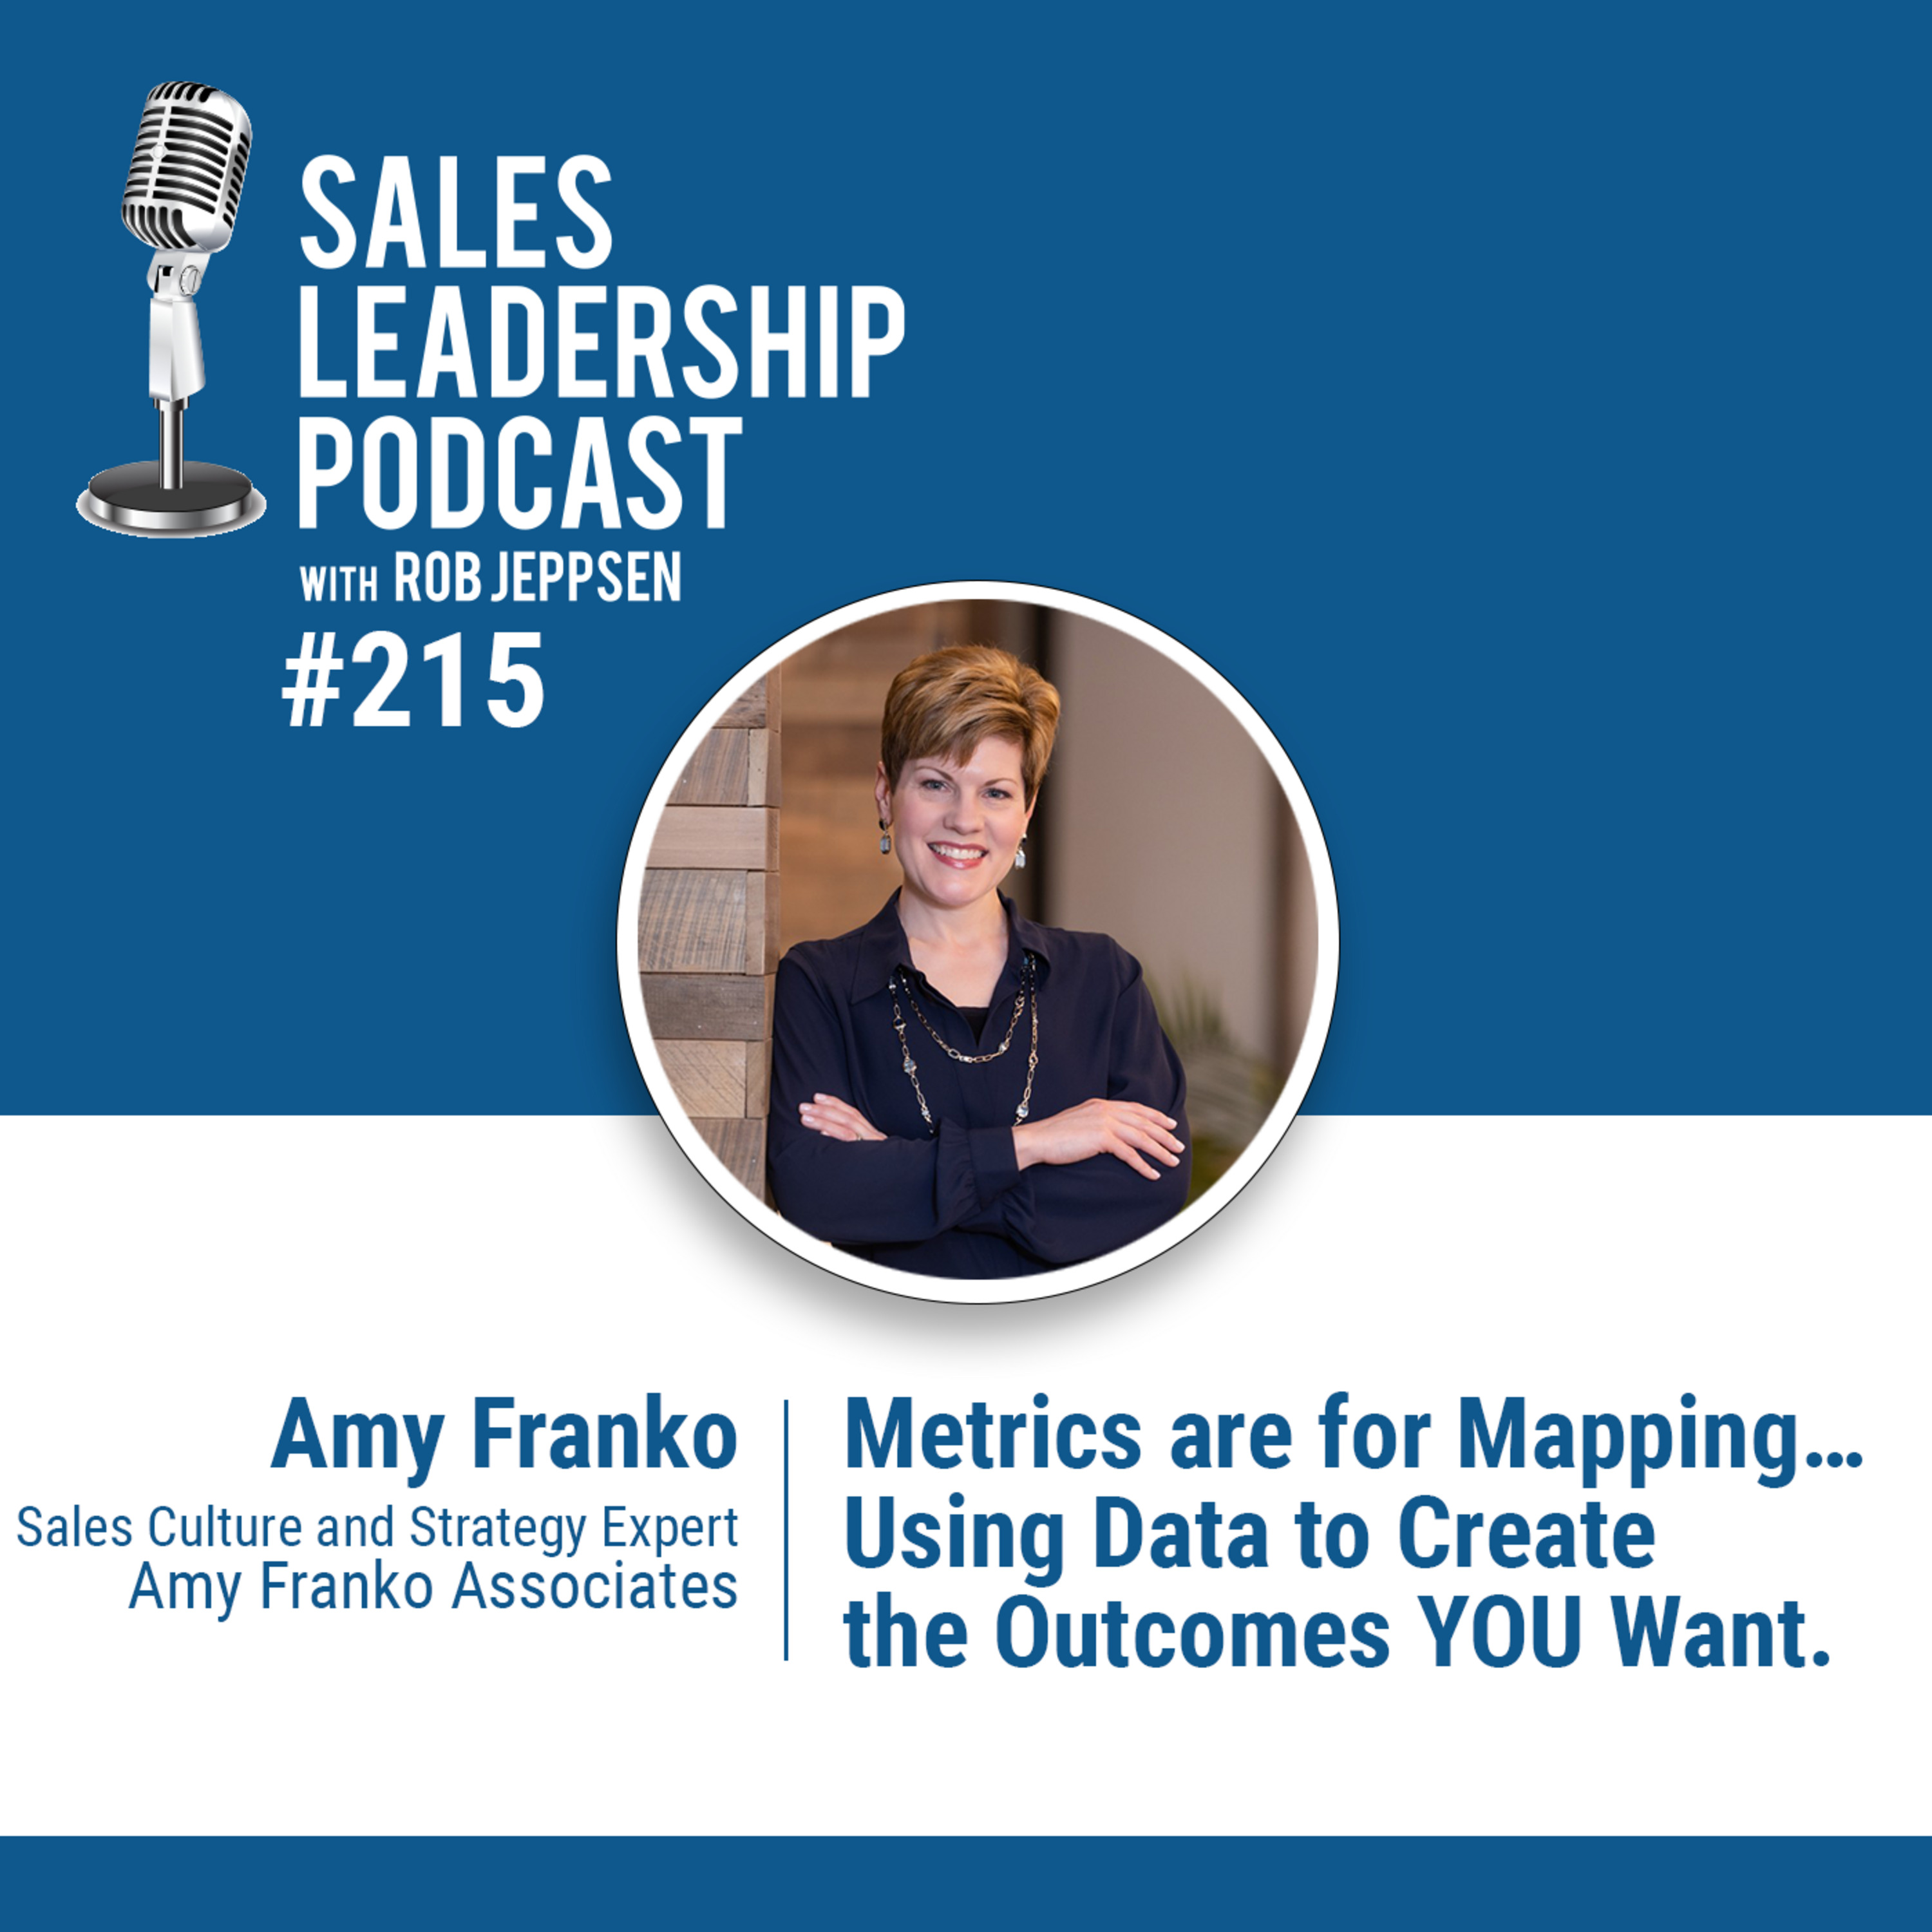 Episode 216: #215: Amy Franko, Sales Strategy and Culture Expert  —  Metrics are for Mapping…Using Data to Create the Outcomes YOU Want.